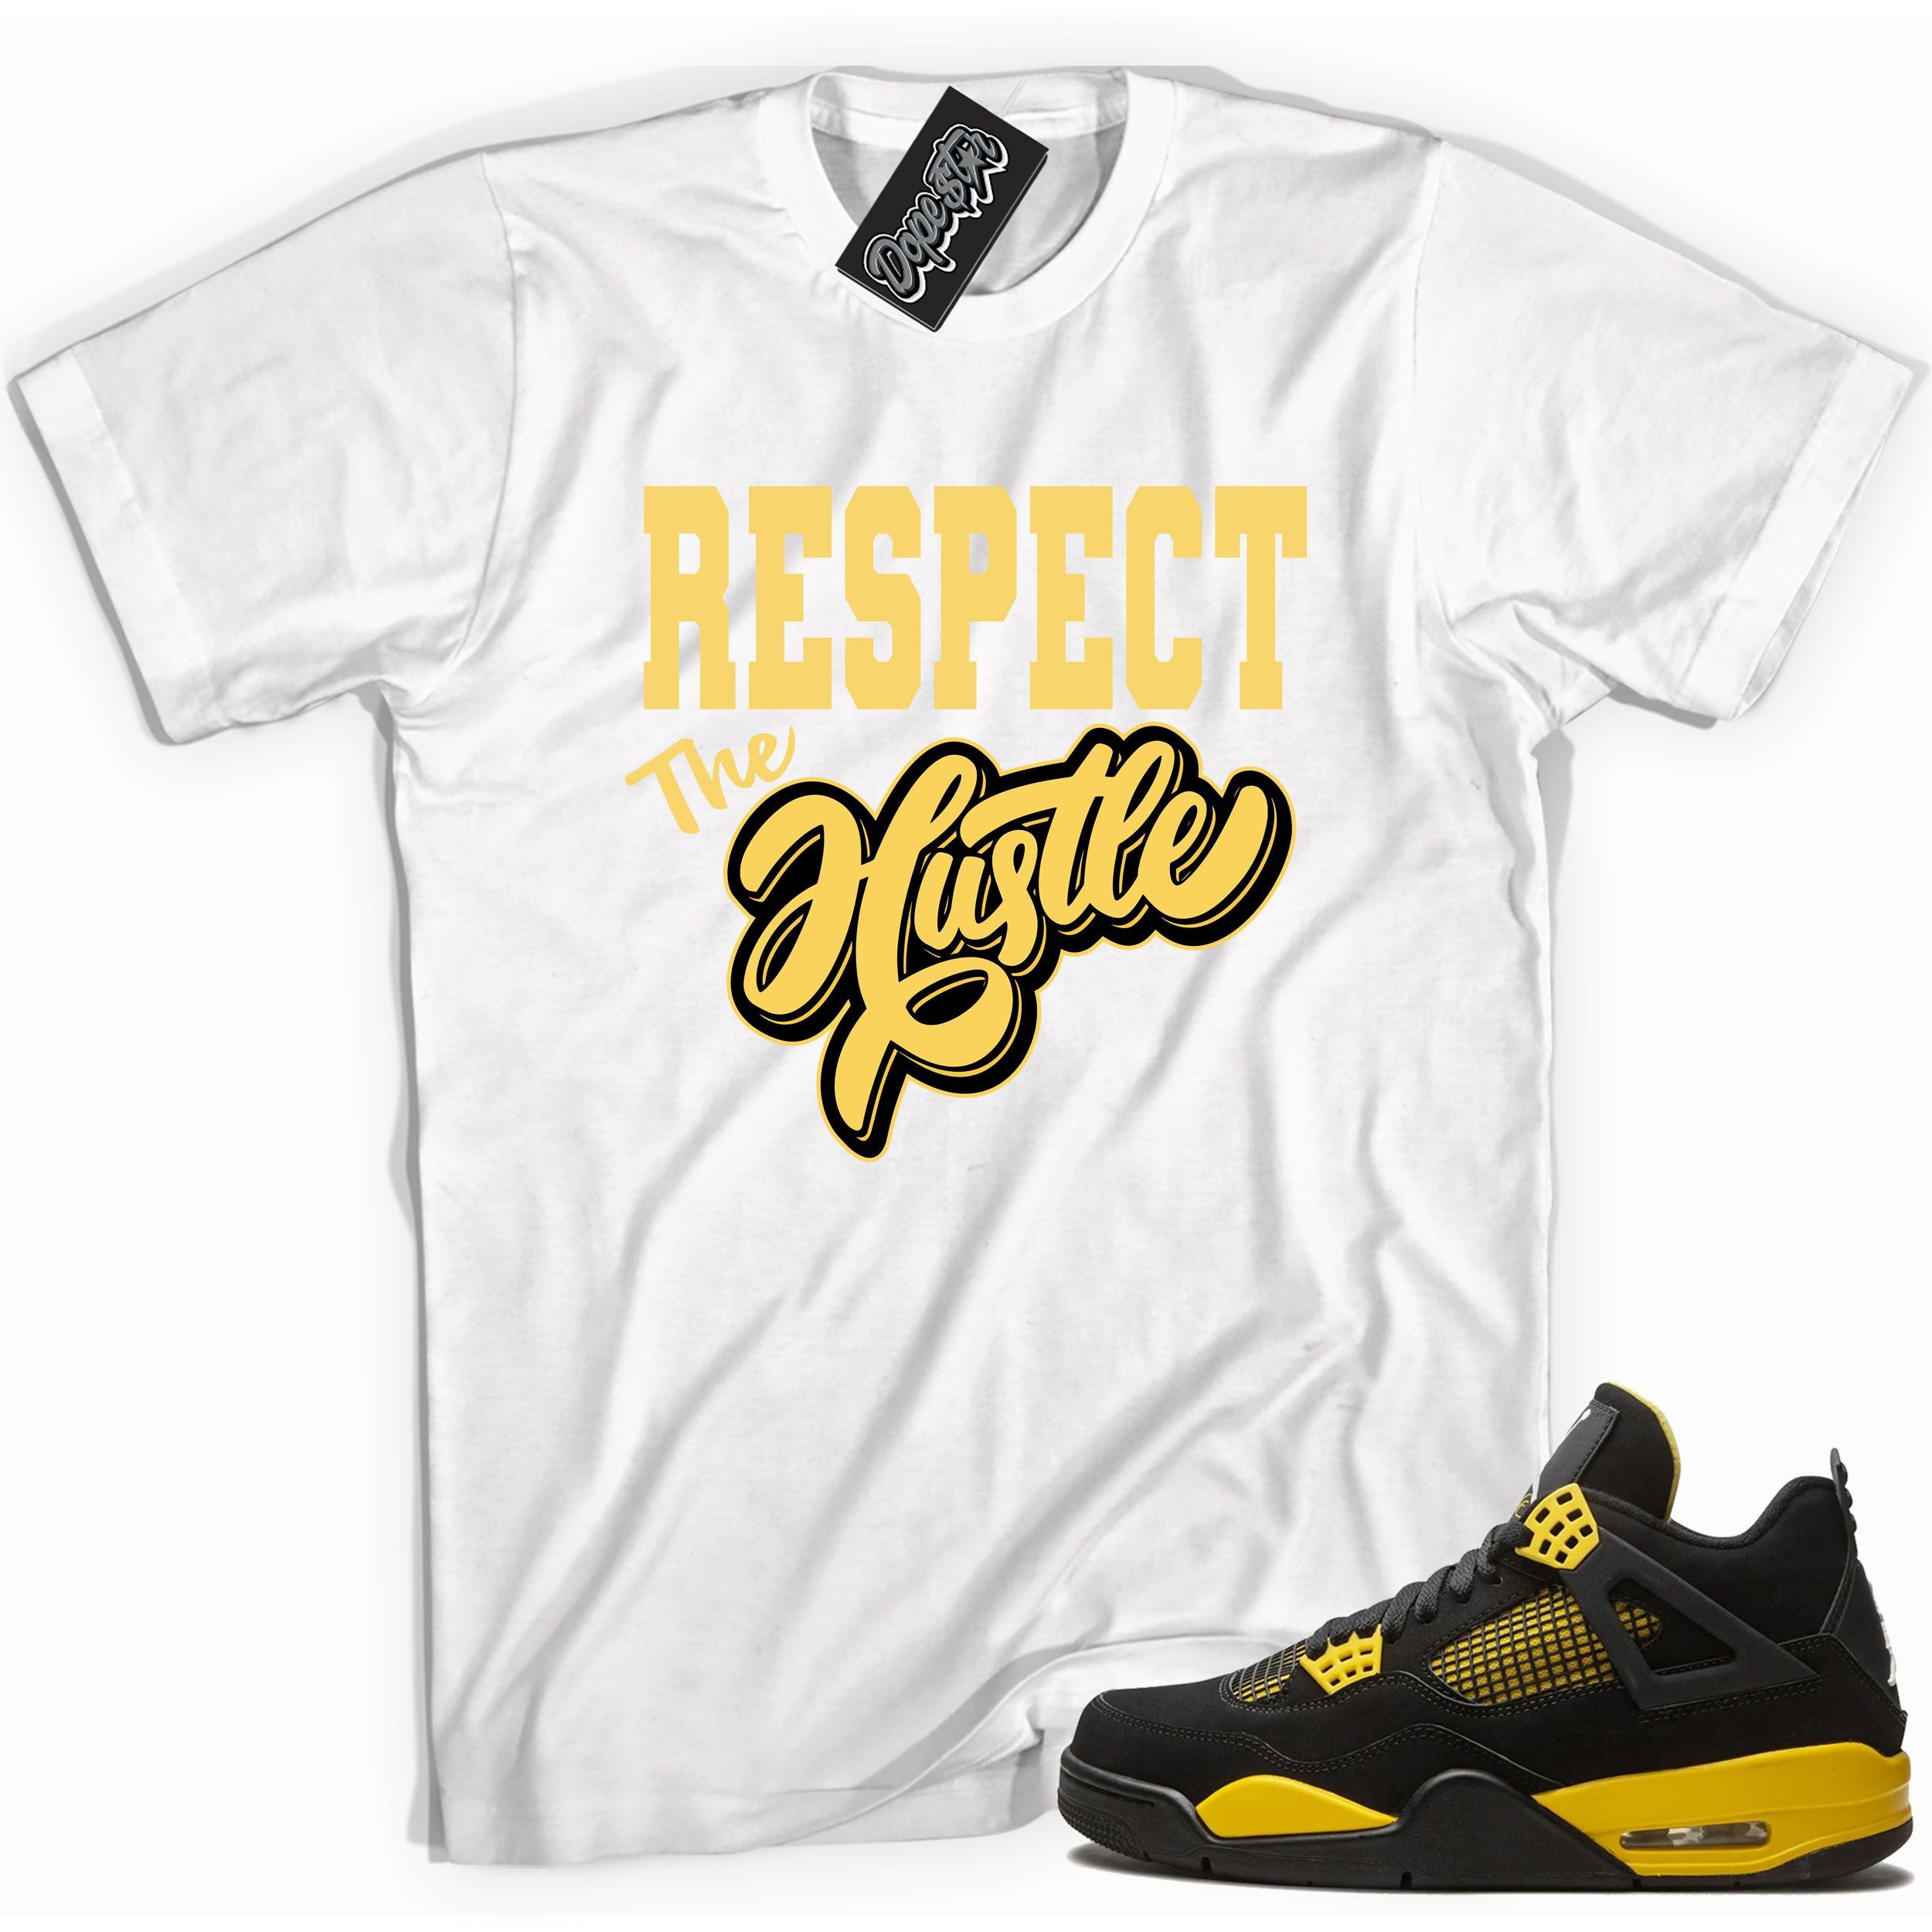 Cool white graphic tee with 'respect the hustle ' print, that perfectly matches Air Jordan 4 Thunder sneakers